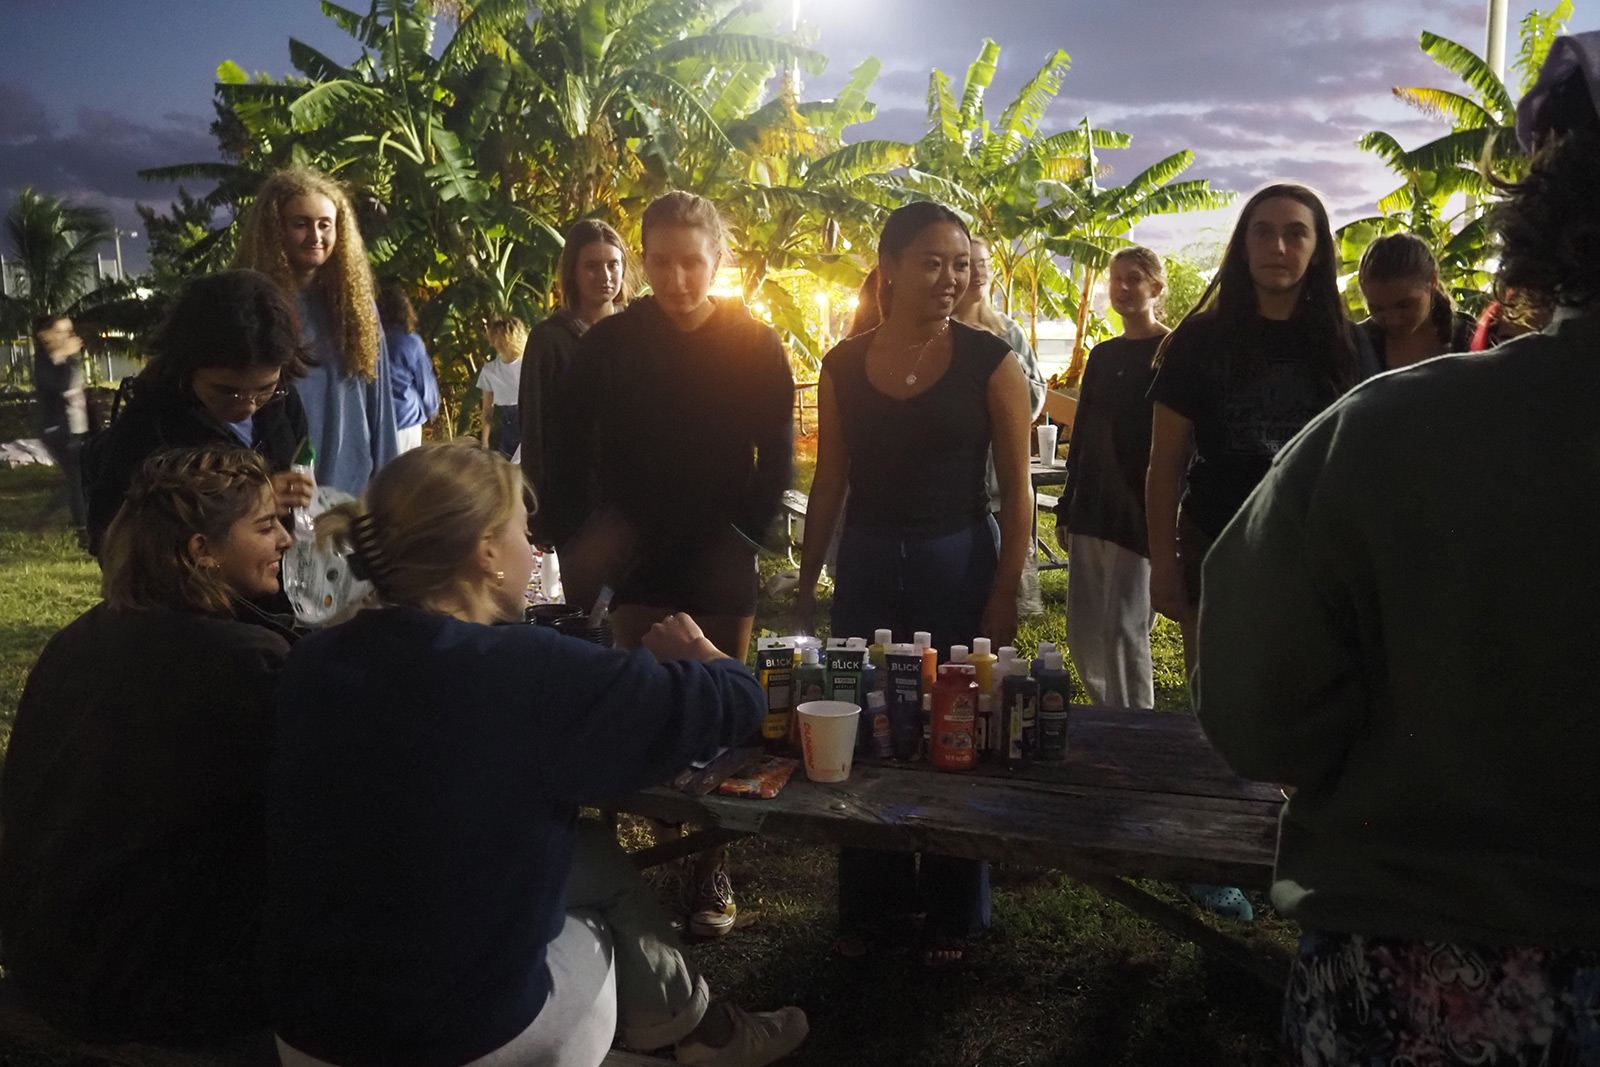 A group of students sitting and standing around a picnic table in the evening with banana trees in the background and paints on the table